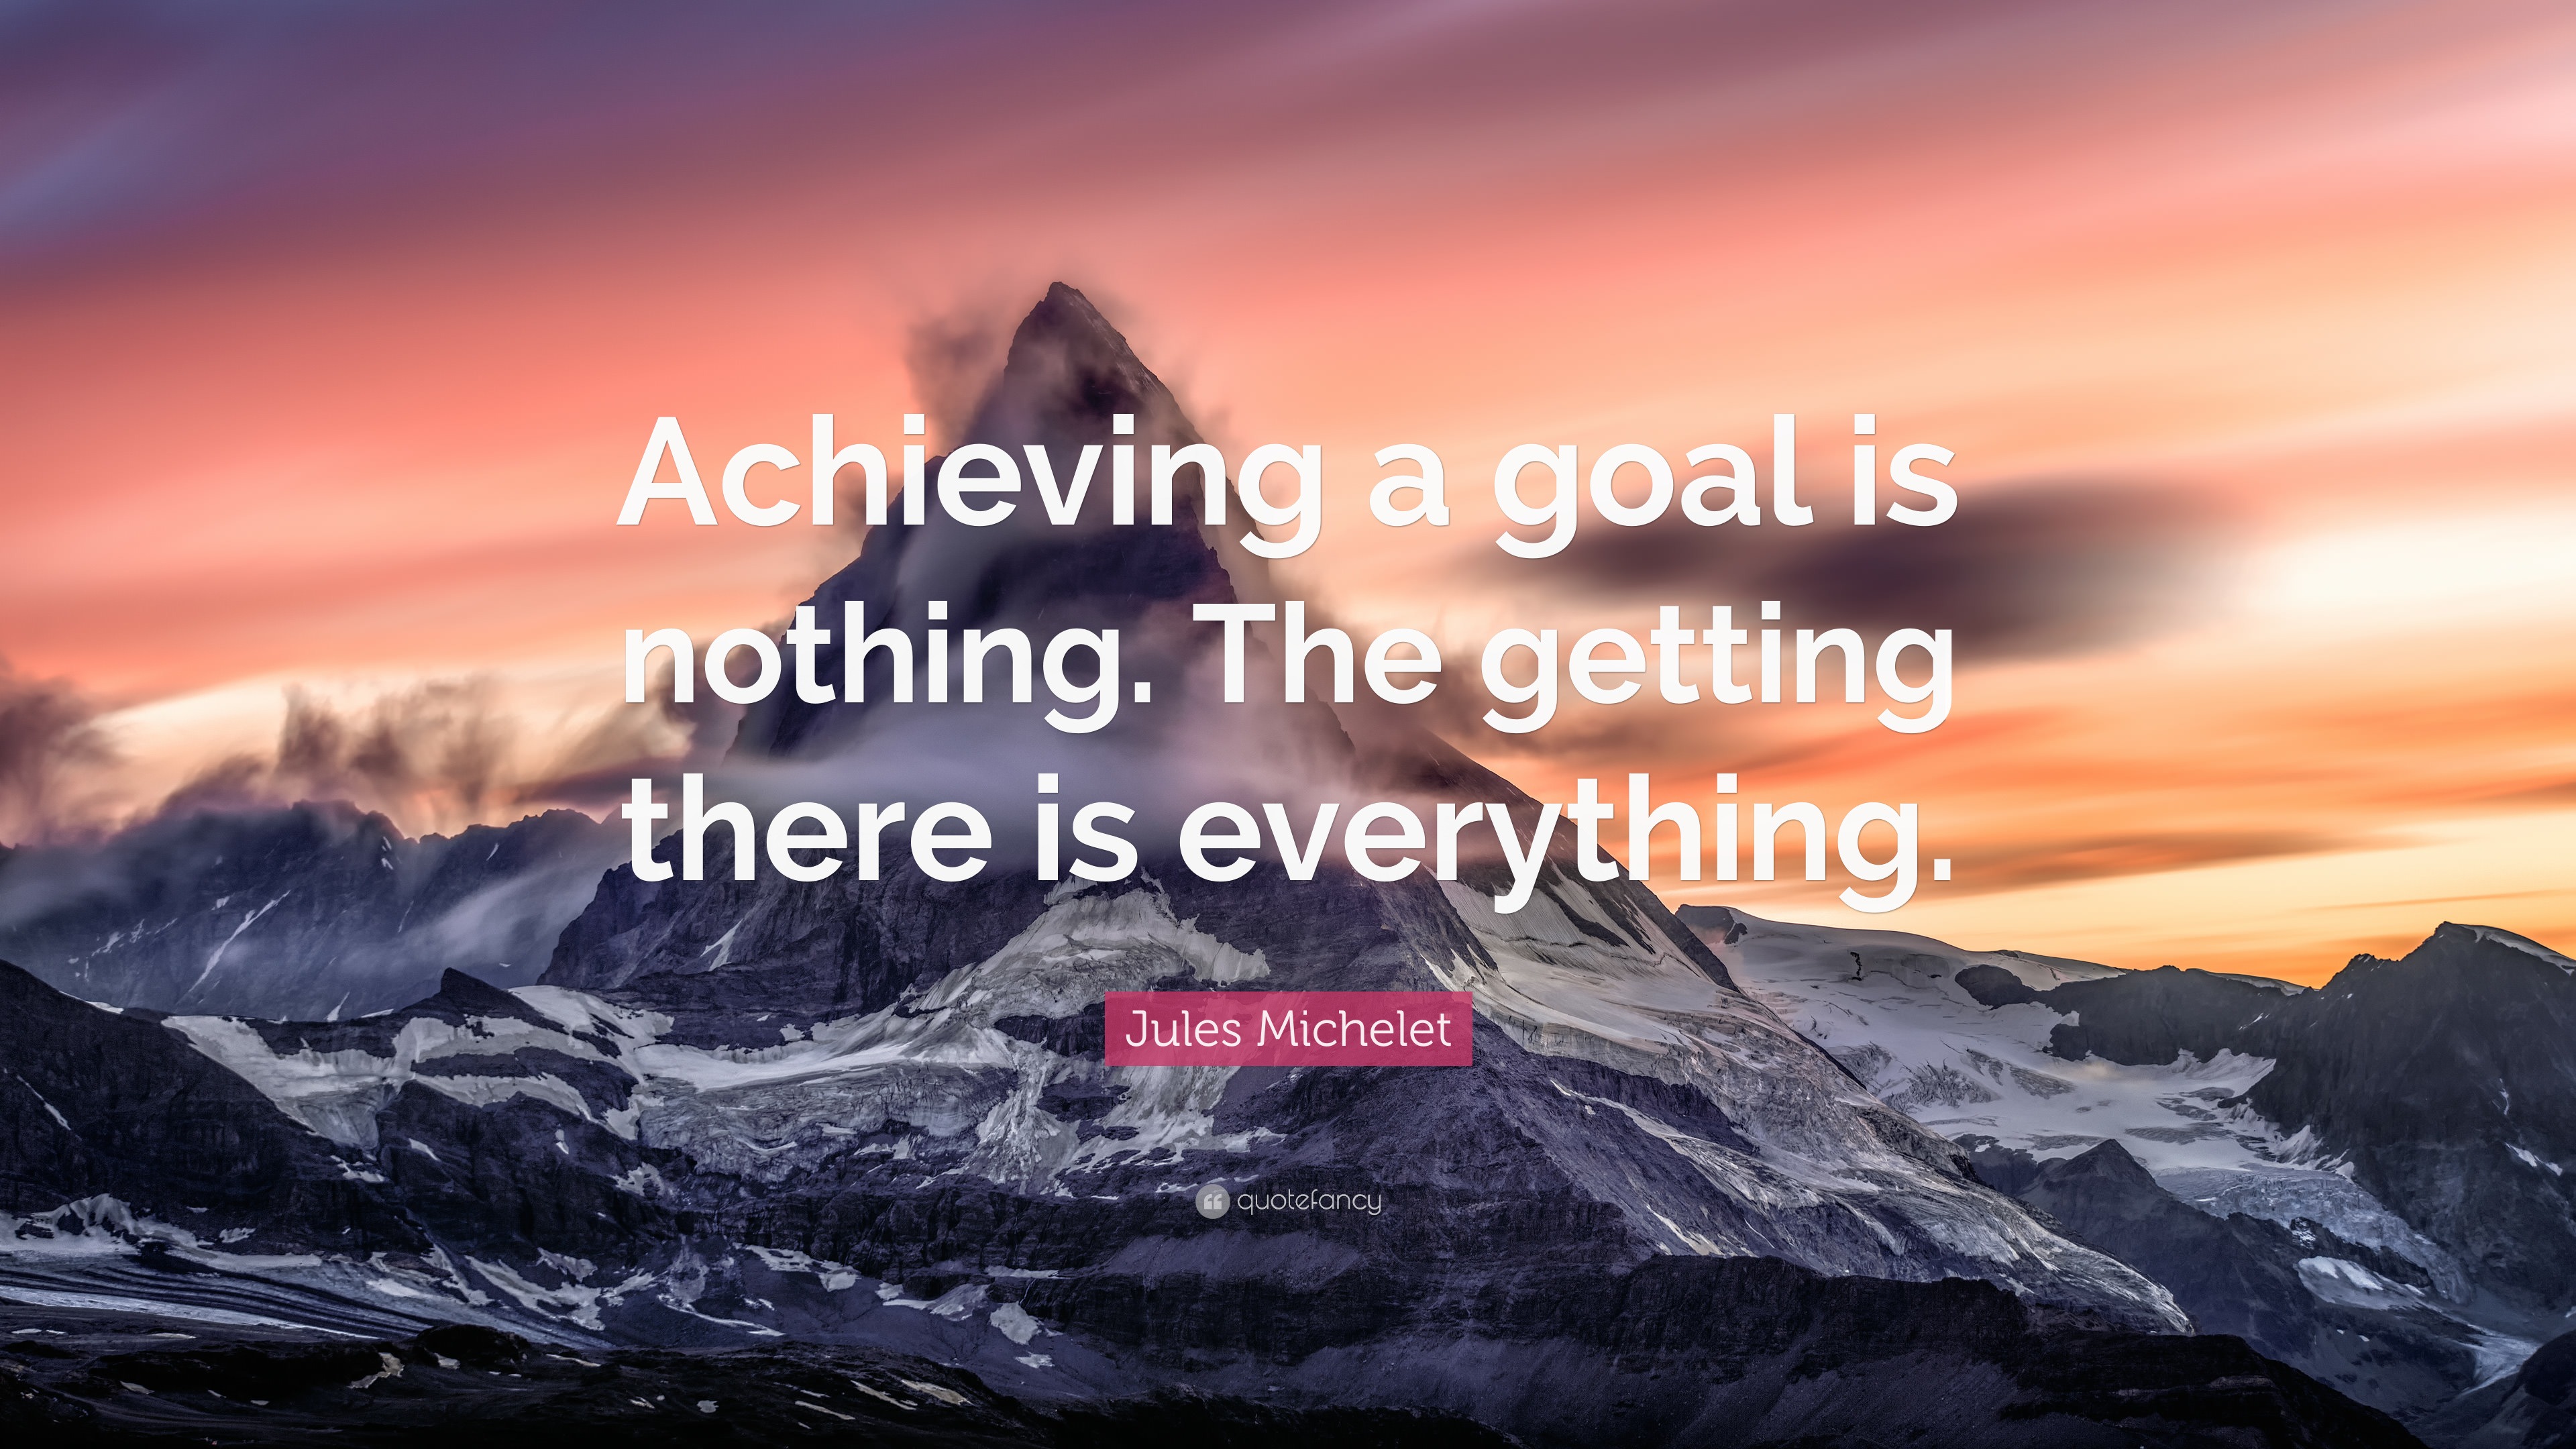 Jules Michelet Quote: “Achieving a goal is nothing. The getting there ...